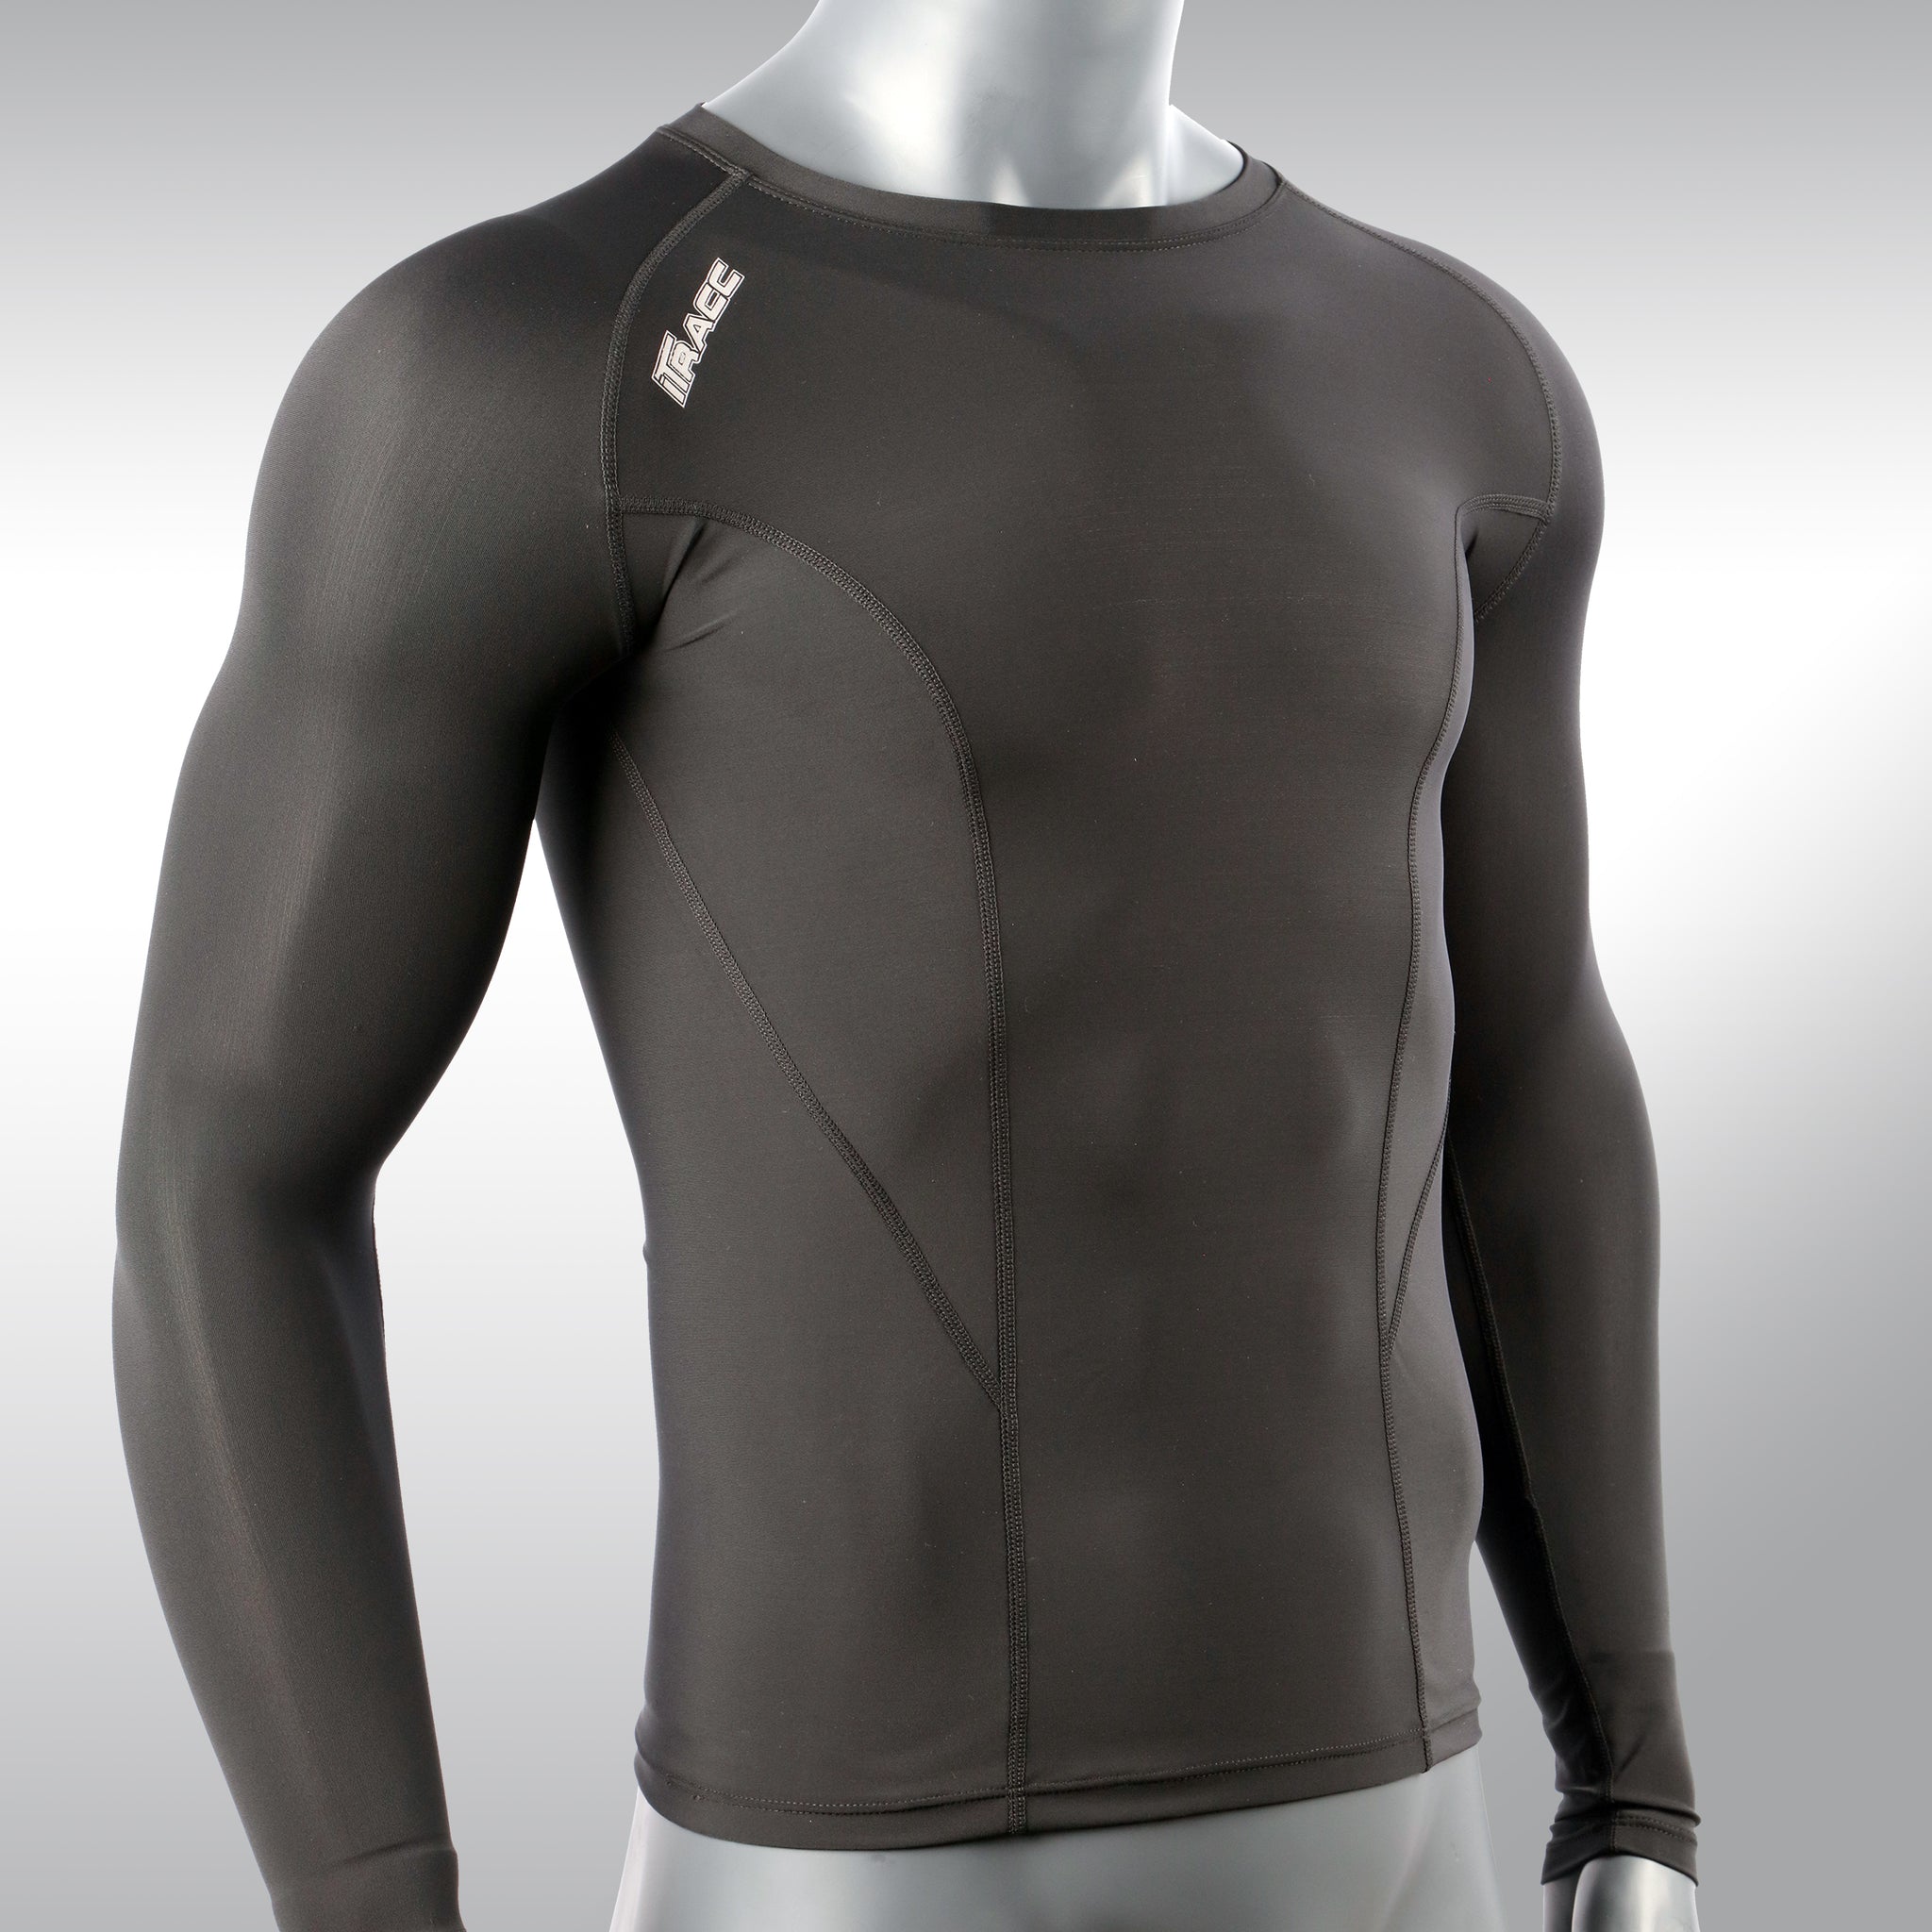 ITRACC, LONG SLEEVES COMPRESSION SHIRT FOR MEN